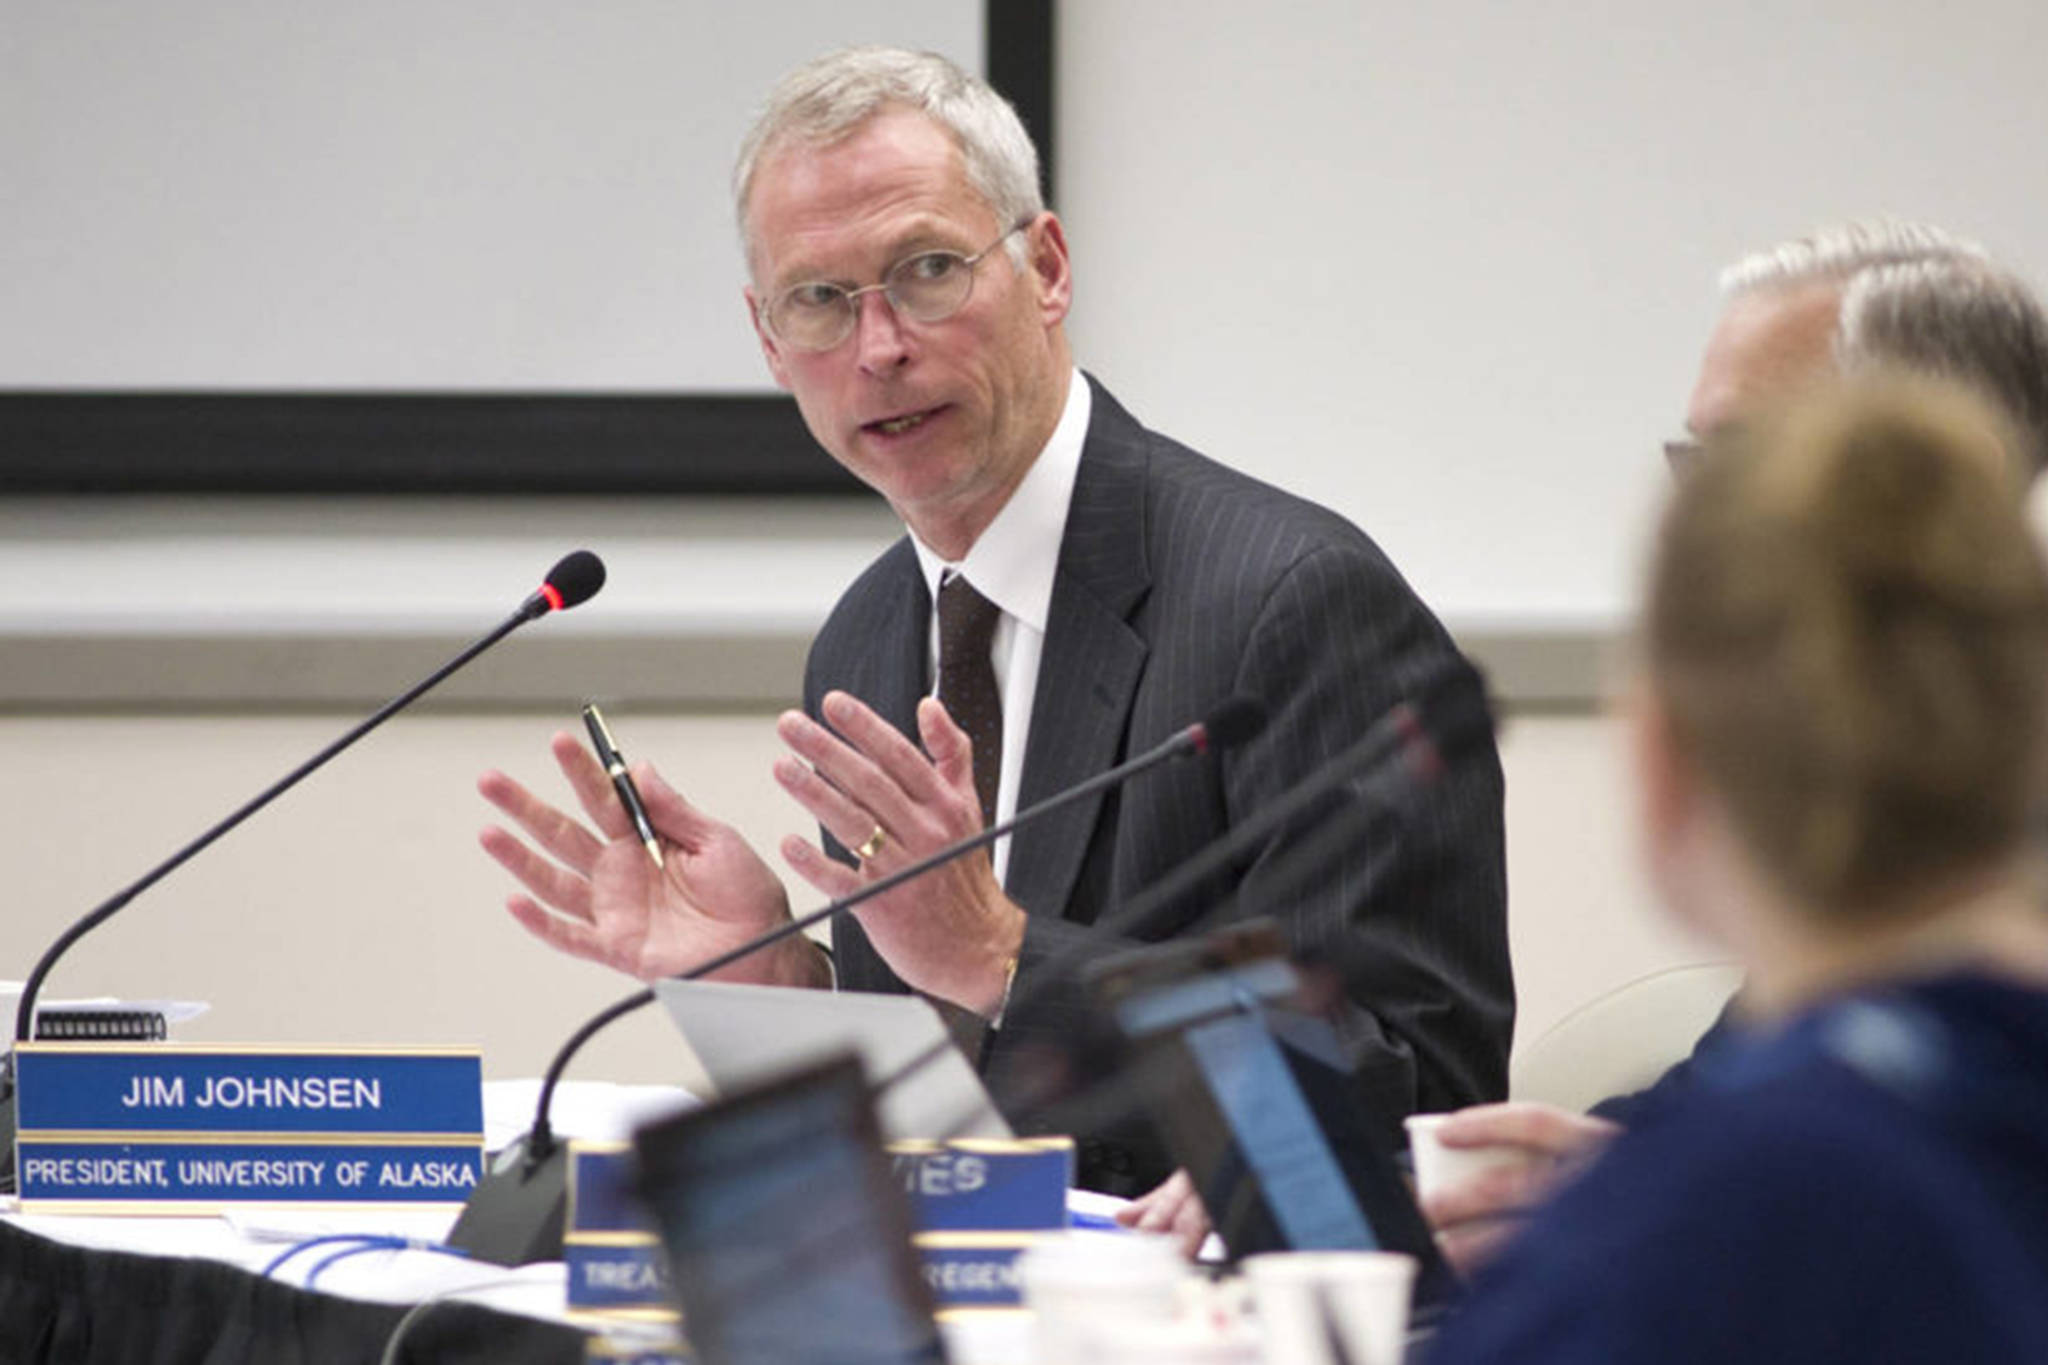 University of Alaska President Jim Johnsen makes a presentation to the university’s Board of Regents at the University of Alaska Southeast Recreation Center on Sept. 15, 2016. Johnsen and the UA board discussed tuition increases and budget concerns Friday. (Michael Penn | Juneau Empire File)